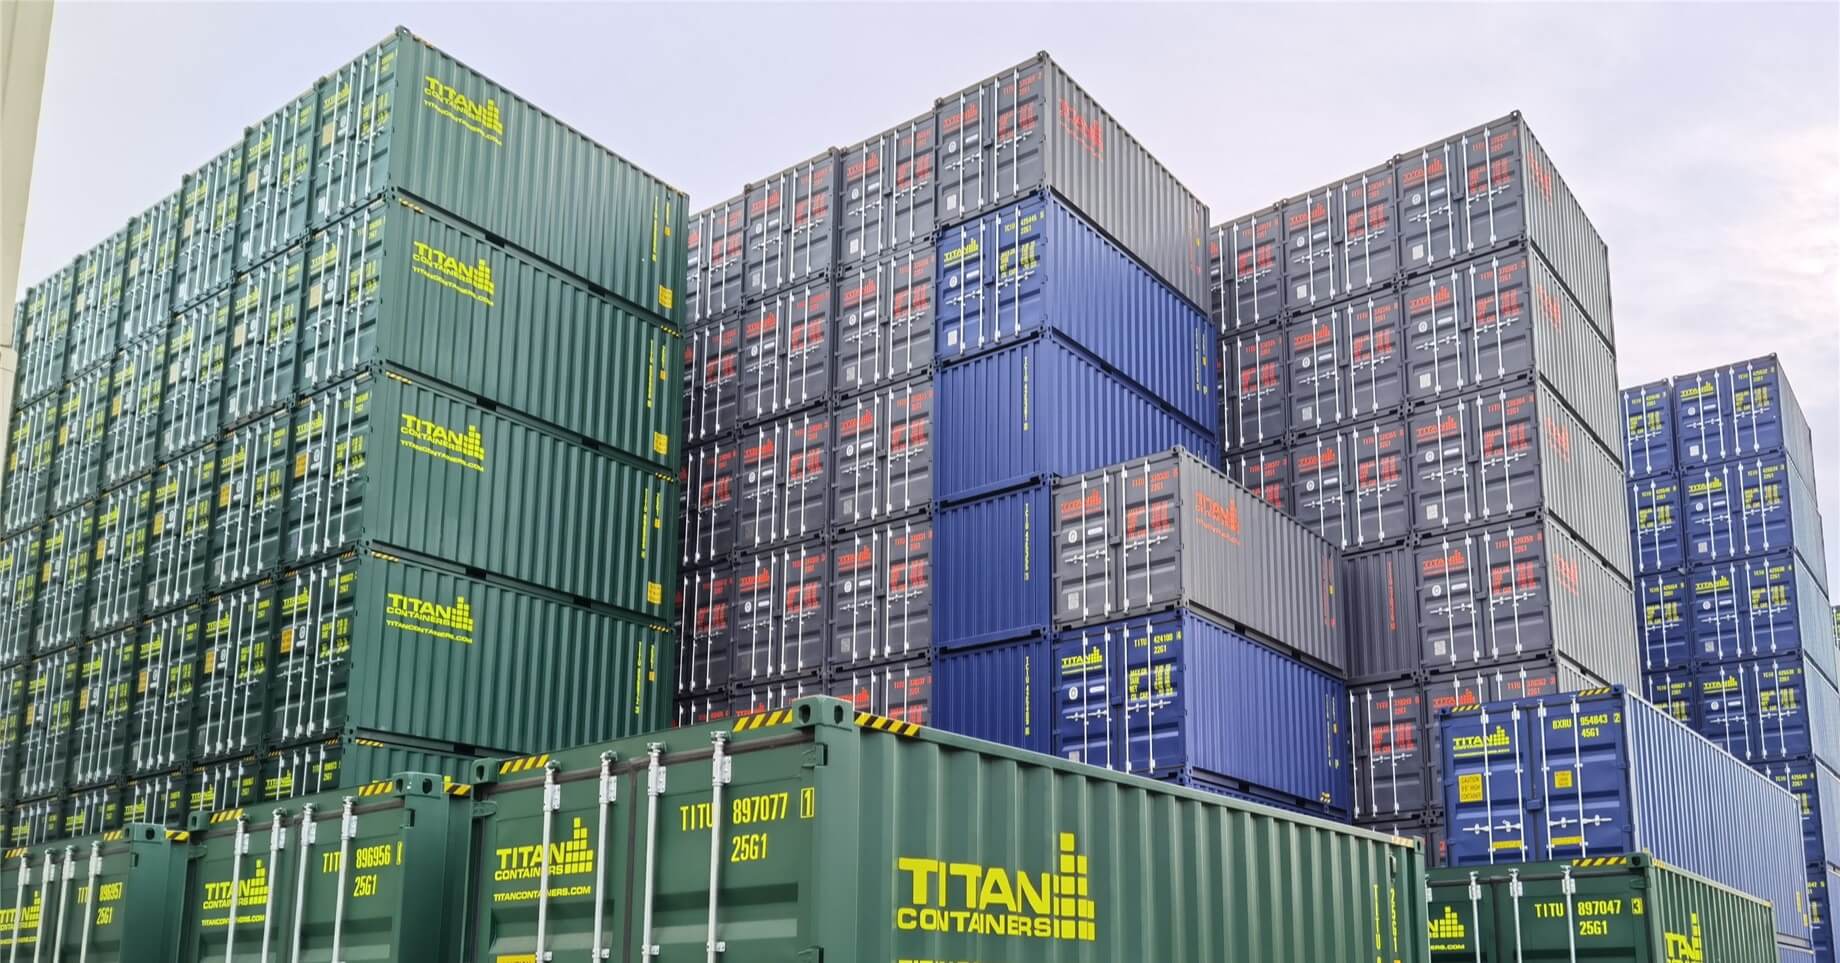 Nyheder fra TITAN Containers